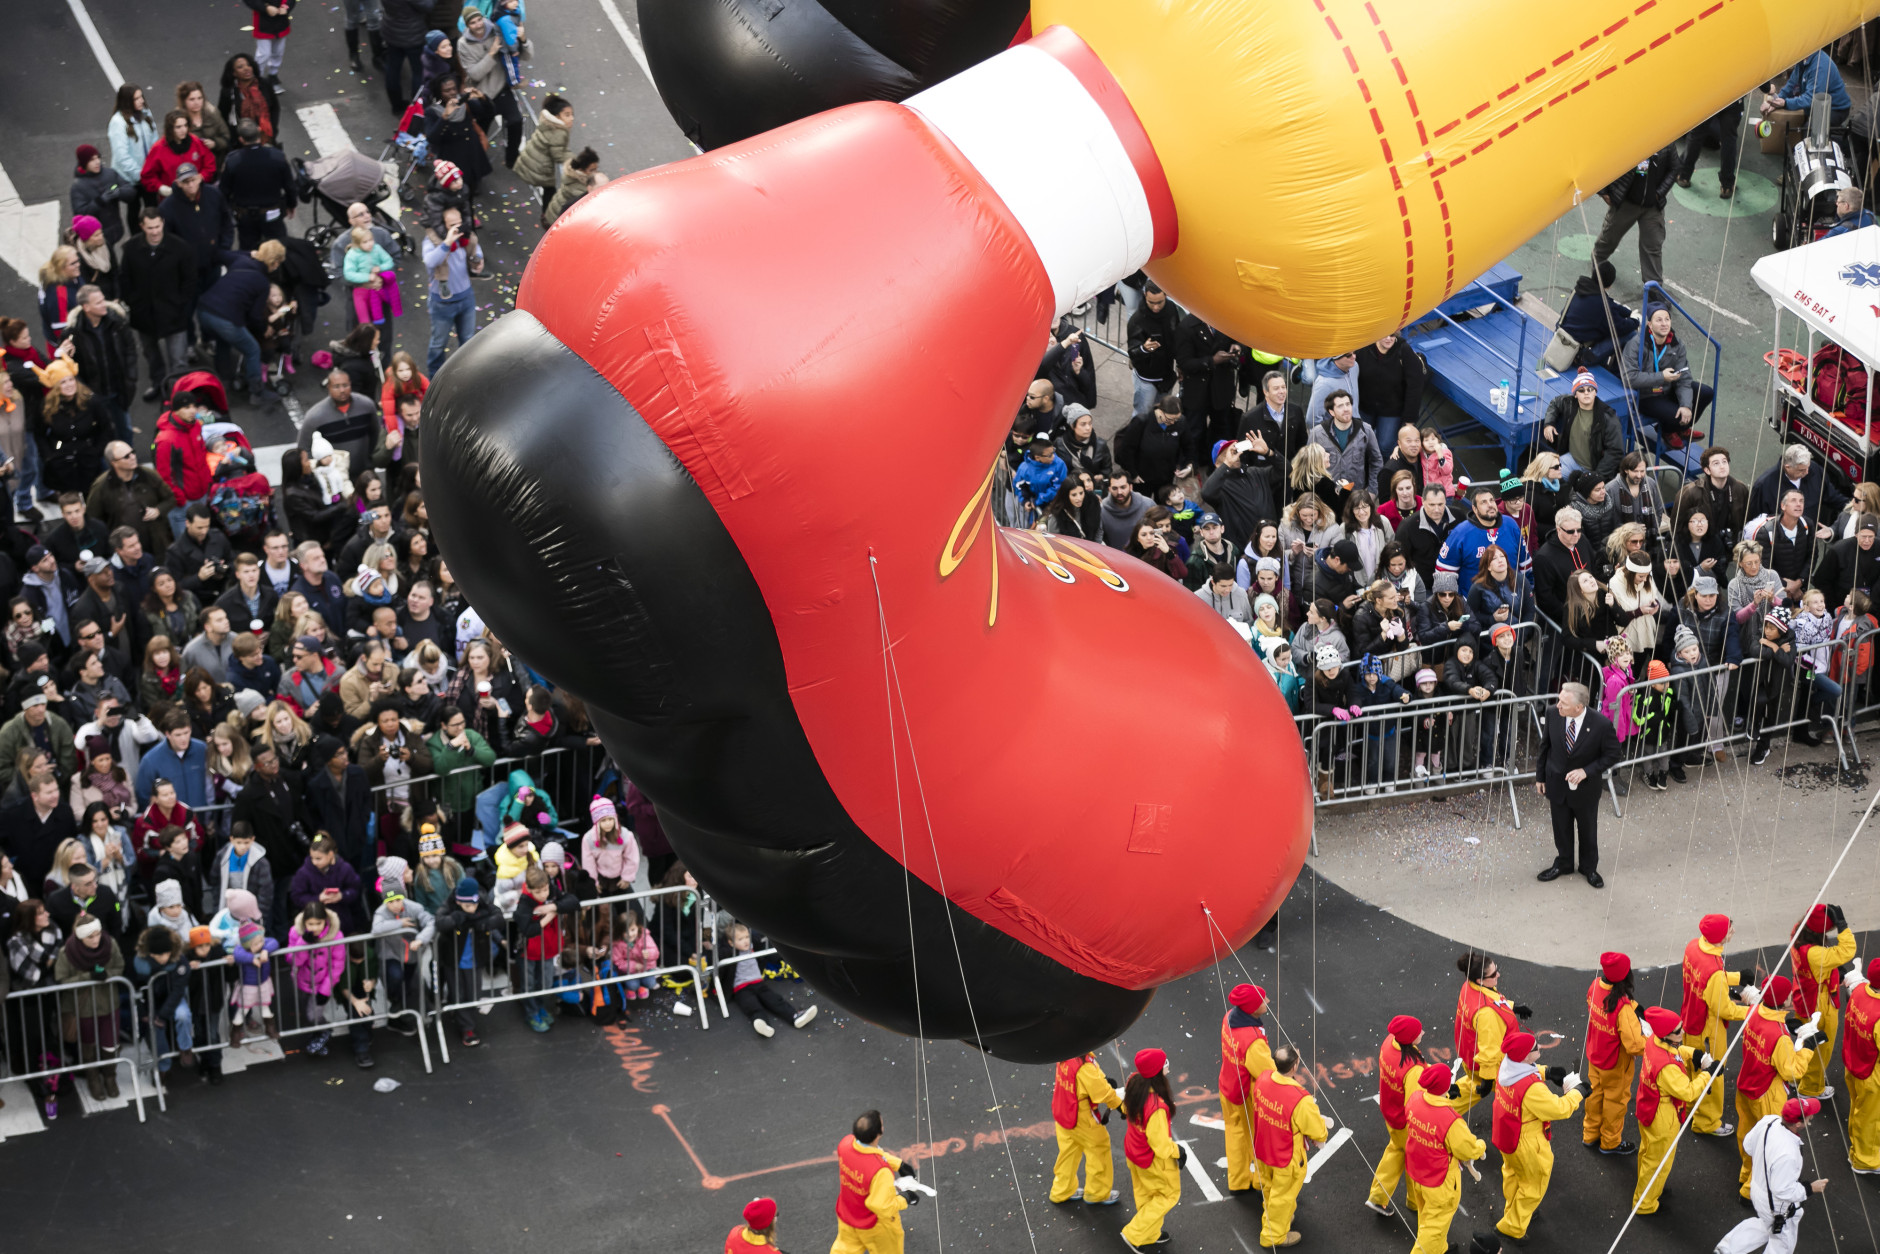 The Ronald McDonald balloon goes down 6th Avenue for the 89th annual Macy's Thanksgiving Day Parade as seen from above street level on Thursday, Nov. 26, 2015, in New York. (Photo by Ben Hider/Invision/AP)